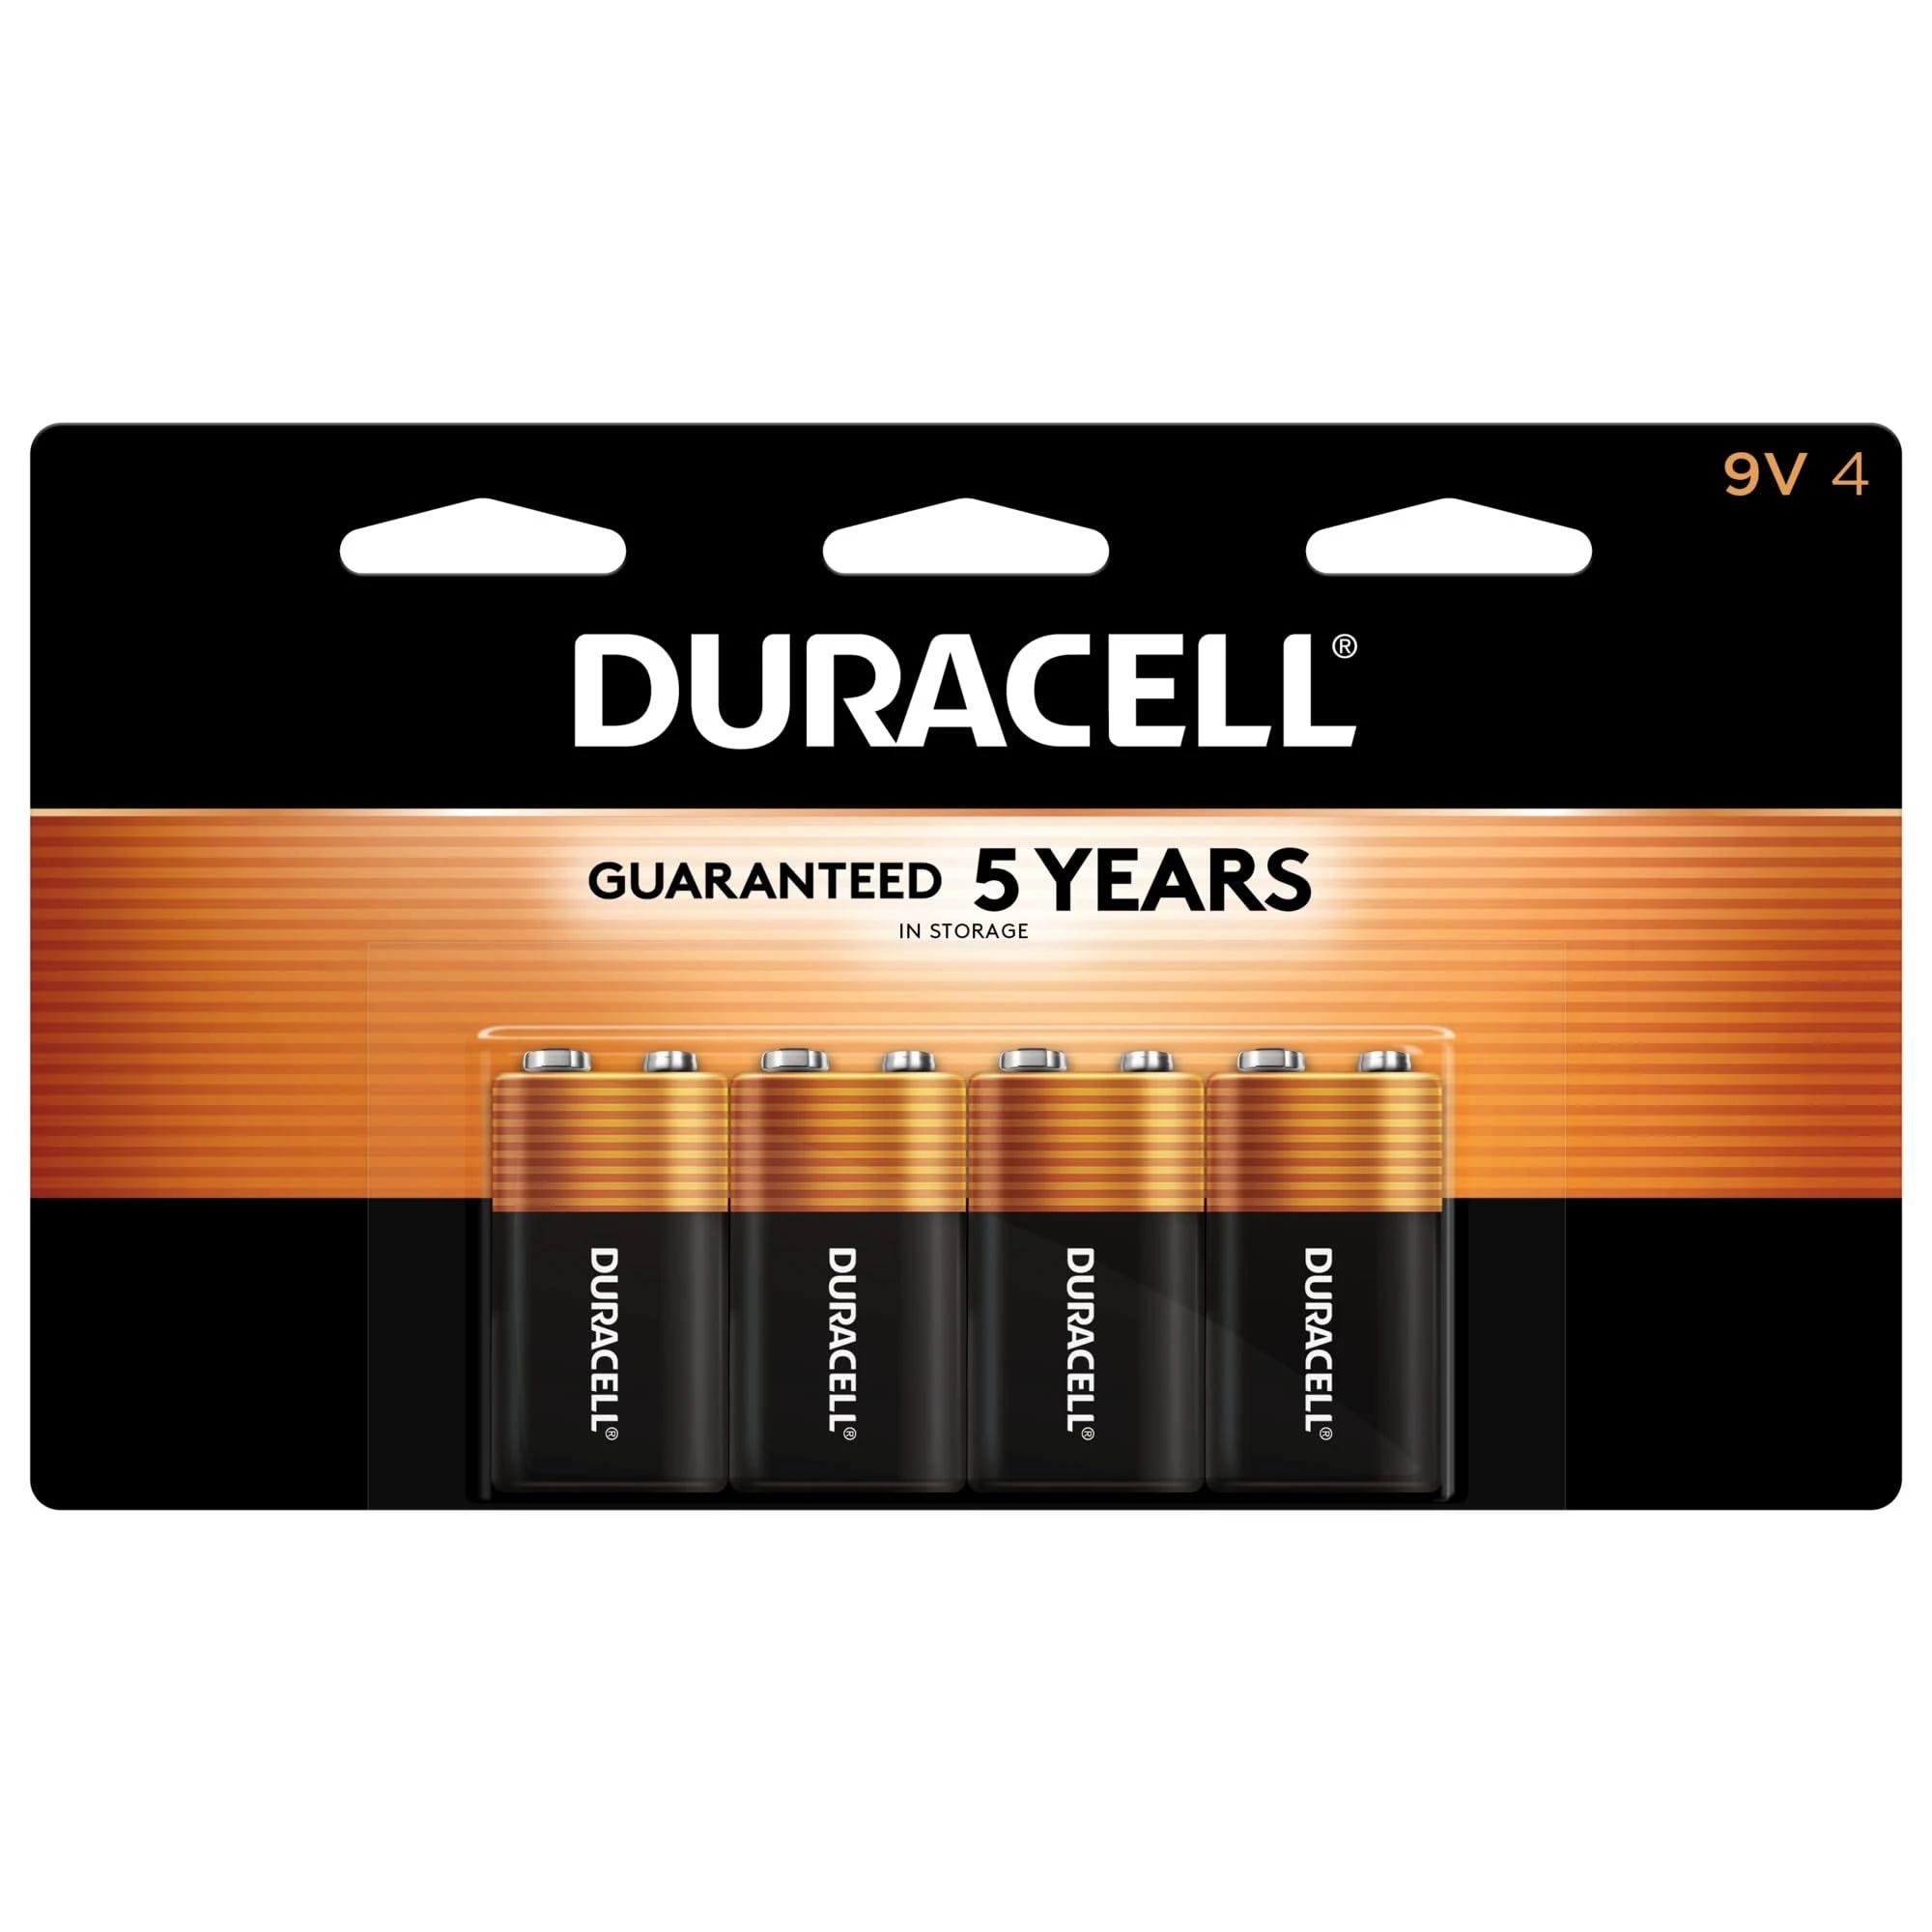 Duracell 9V Alkaline Batteries - Long Lasting and Dependable Power | Image